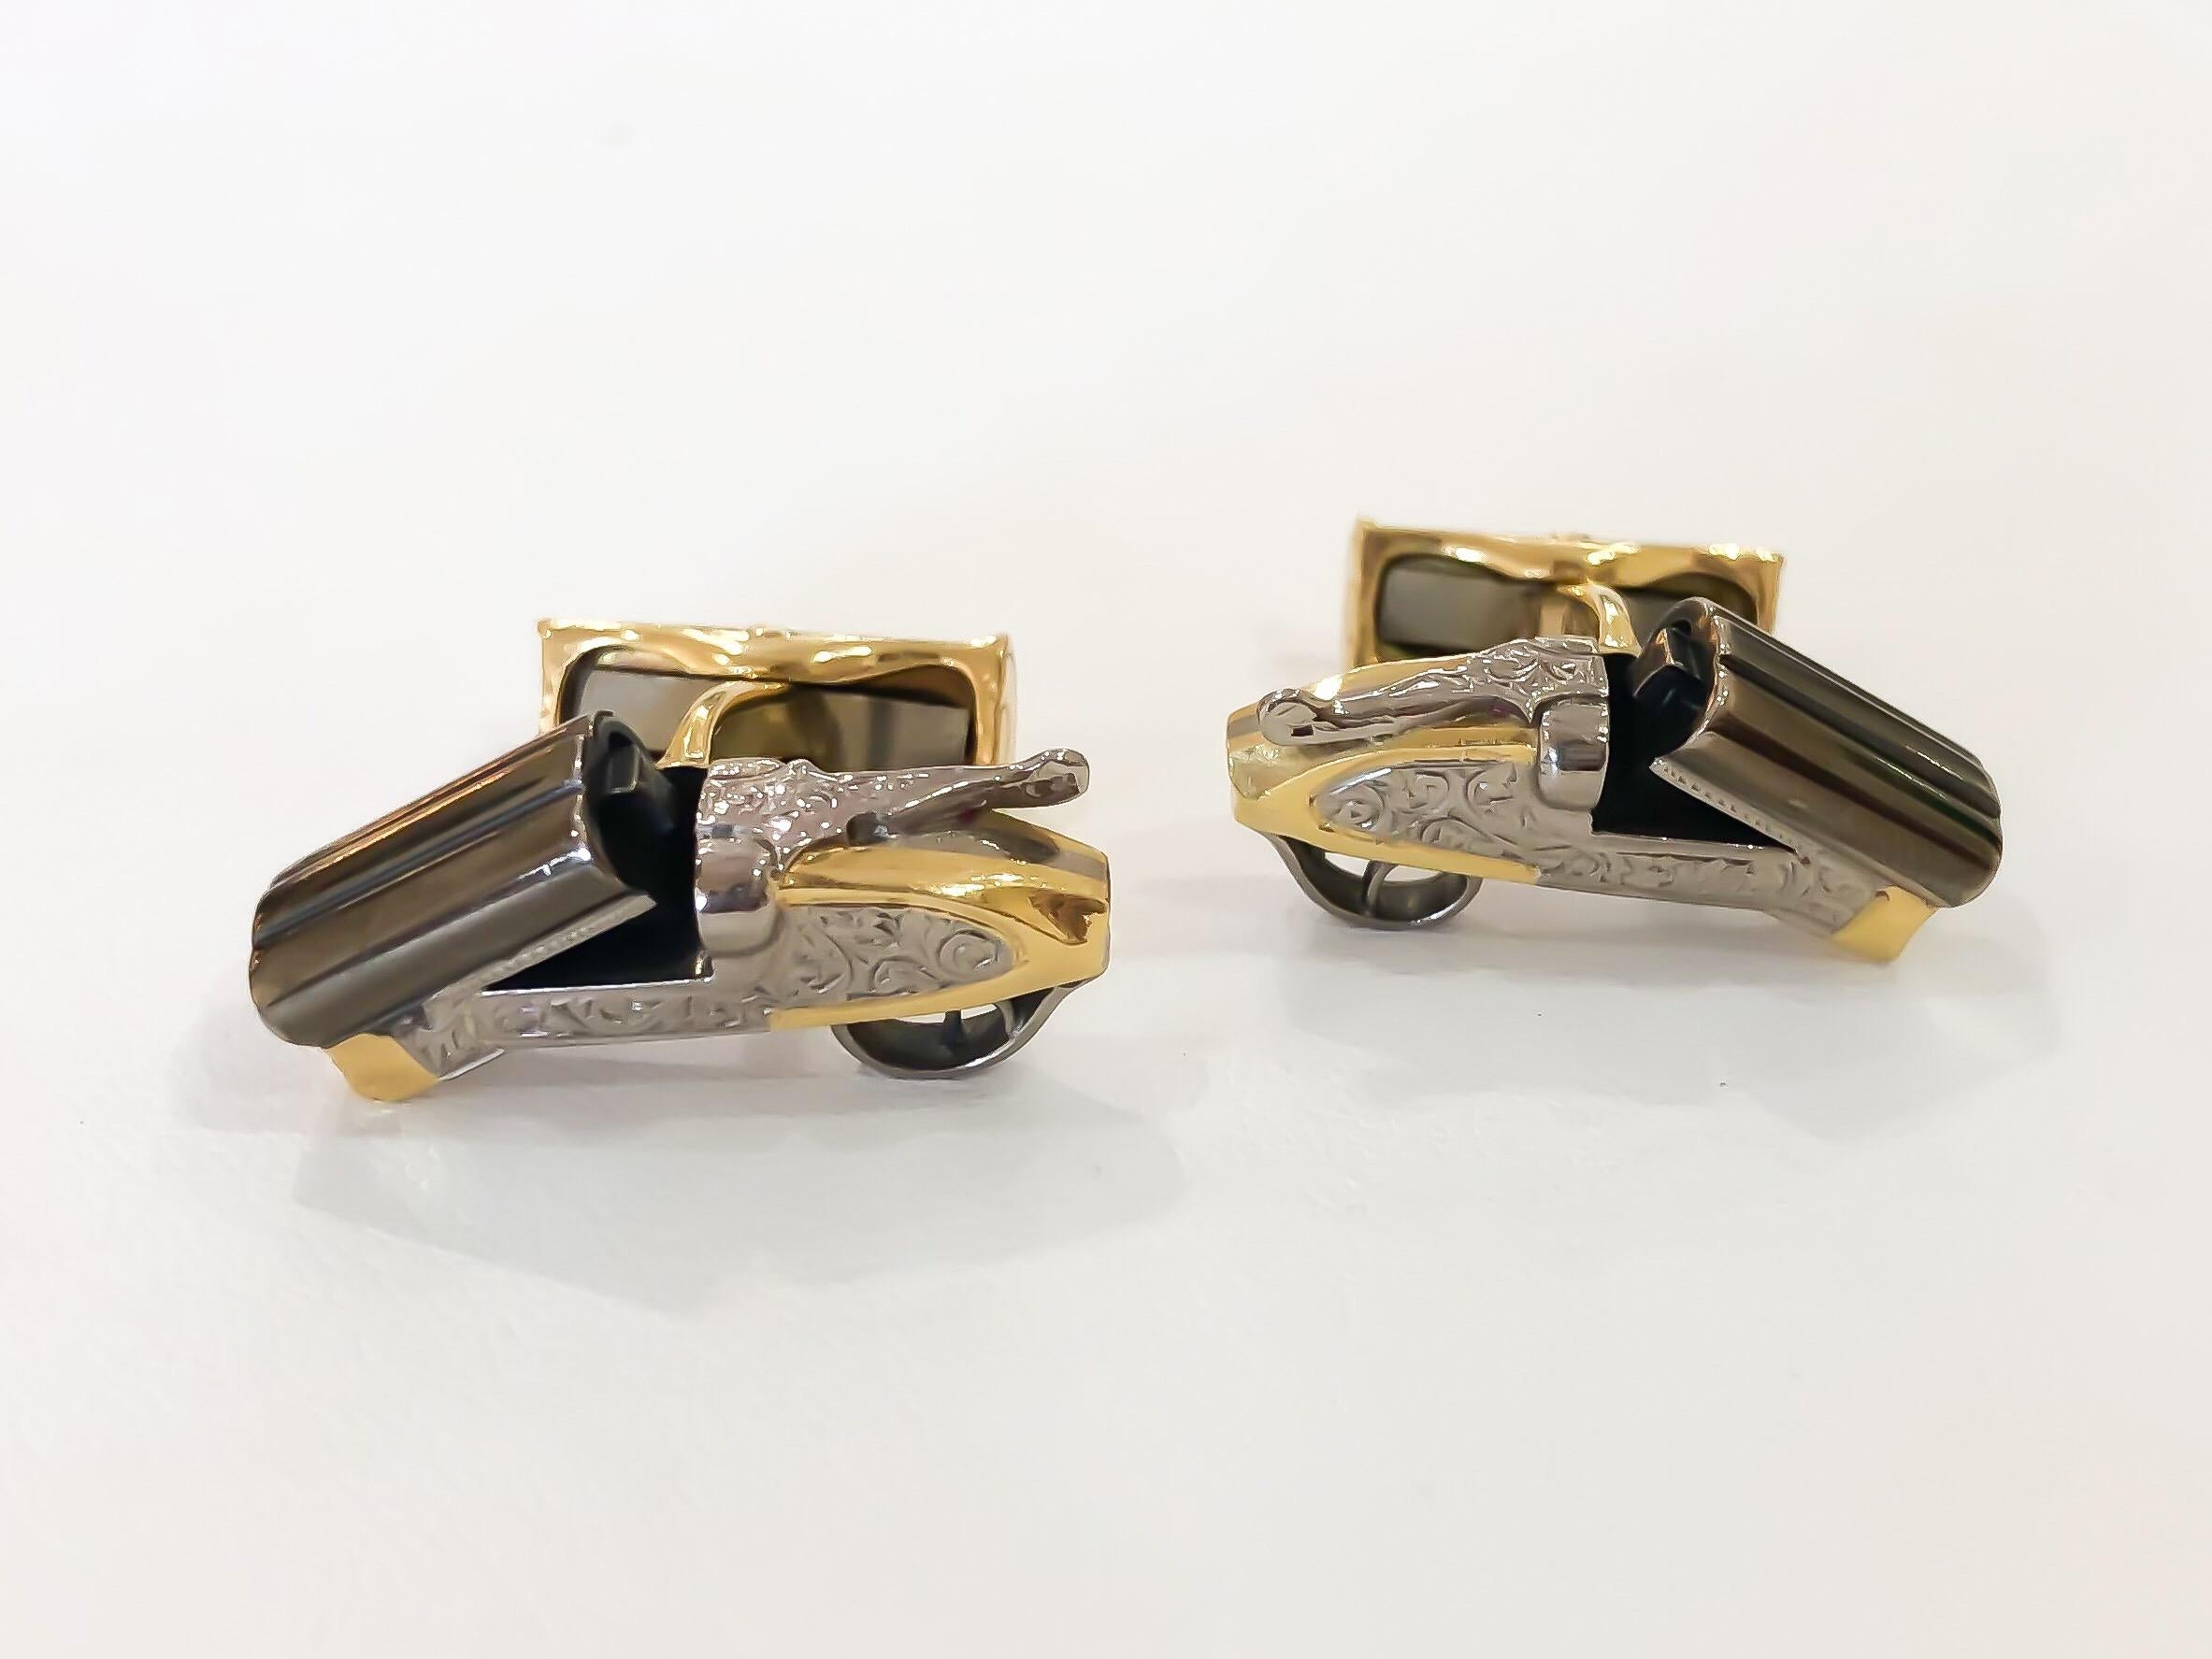 Stunning pre-owned solid 18 karat gold shotgun cufflinks with Cocked Barrel and Cartridge Fitting. These yellow and white gold engraved shotgun cufflinks have a spring sugarloaf fitting with cocked barrel and cartridge features to add to the design.